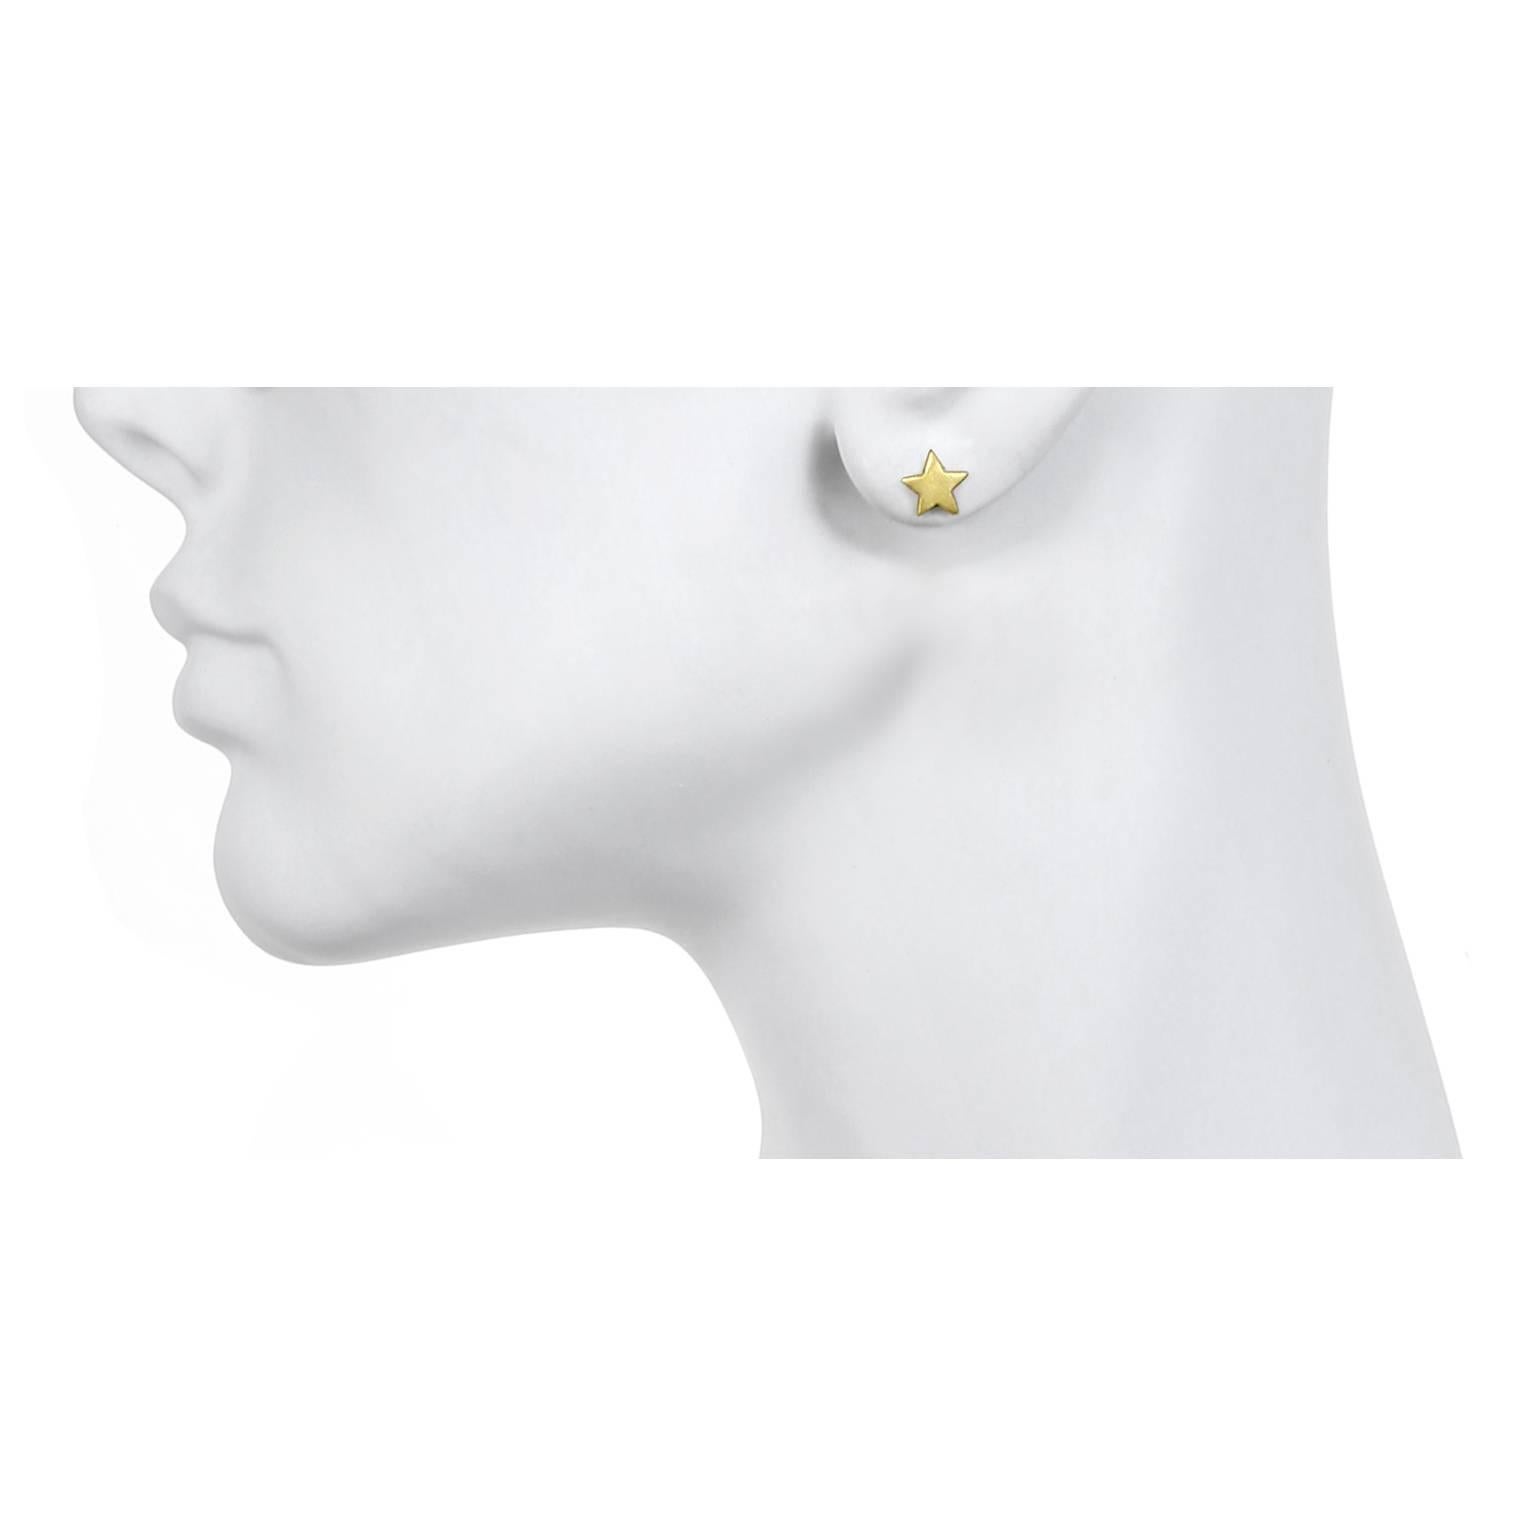 Faye Kim 18k Gold Moon and Star Stud Earrings
Let the moon and stars shine brightly on your ears with these uniquely designed earrings in 18k gold.   Matte-finished.

Length 8mm- 10mm 
Signature Collection:  non negotiable